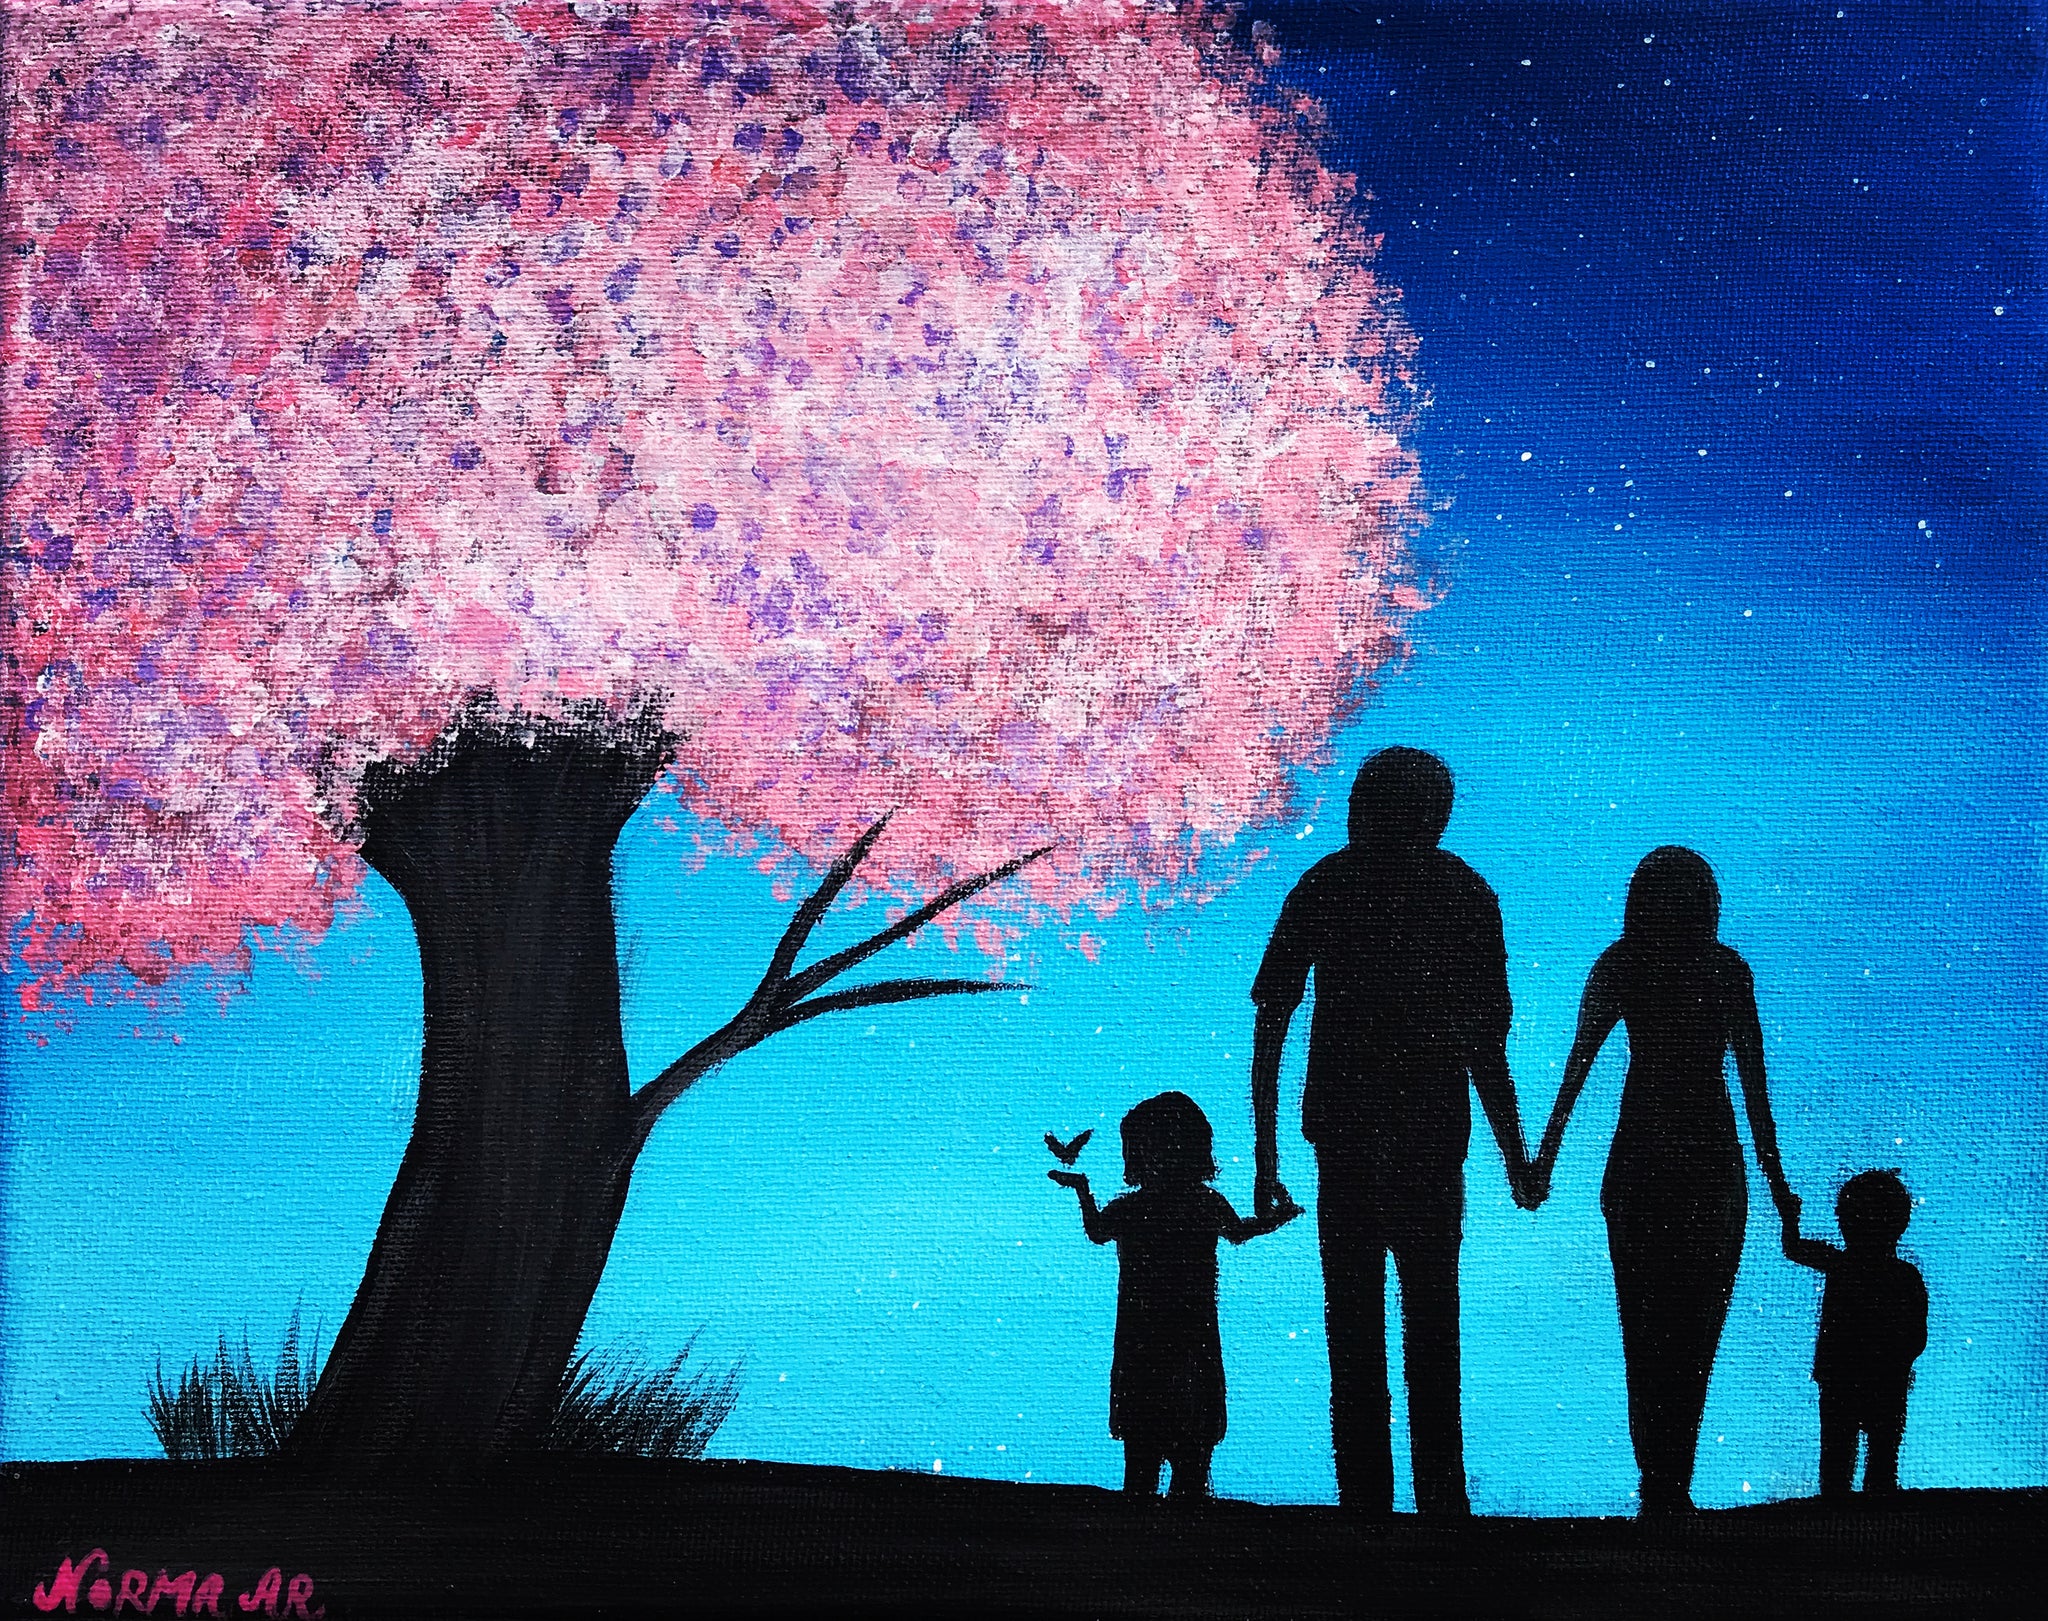 Family Love | Original Art Acrylic Painting, 8x10 inch canvas by Norma Abou-Rizk